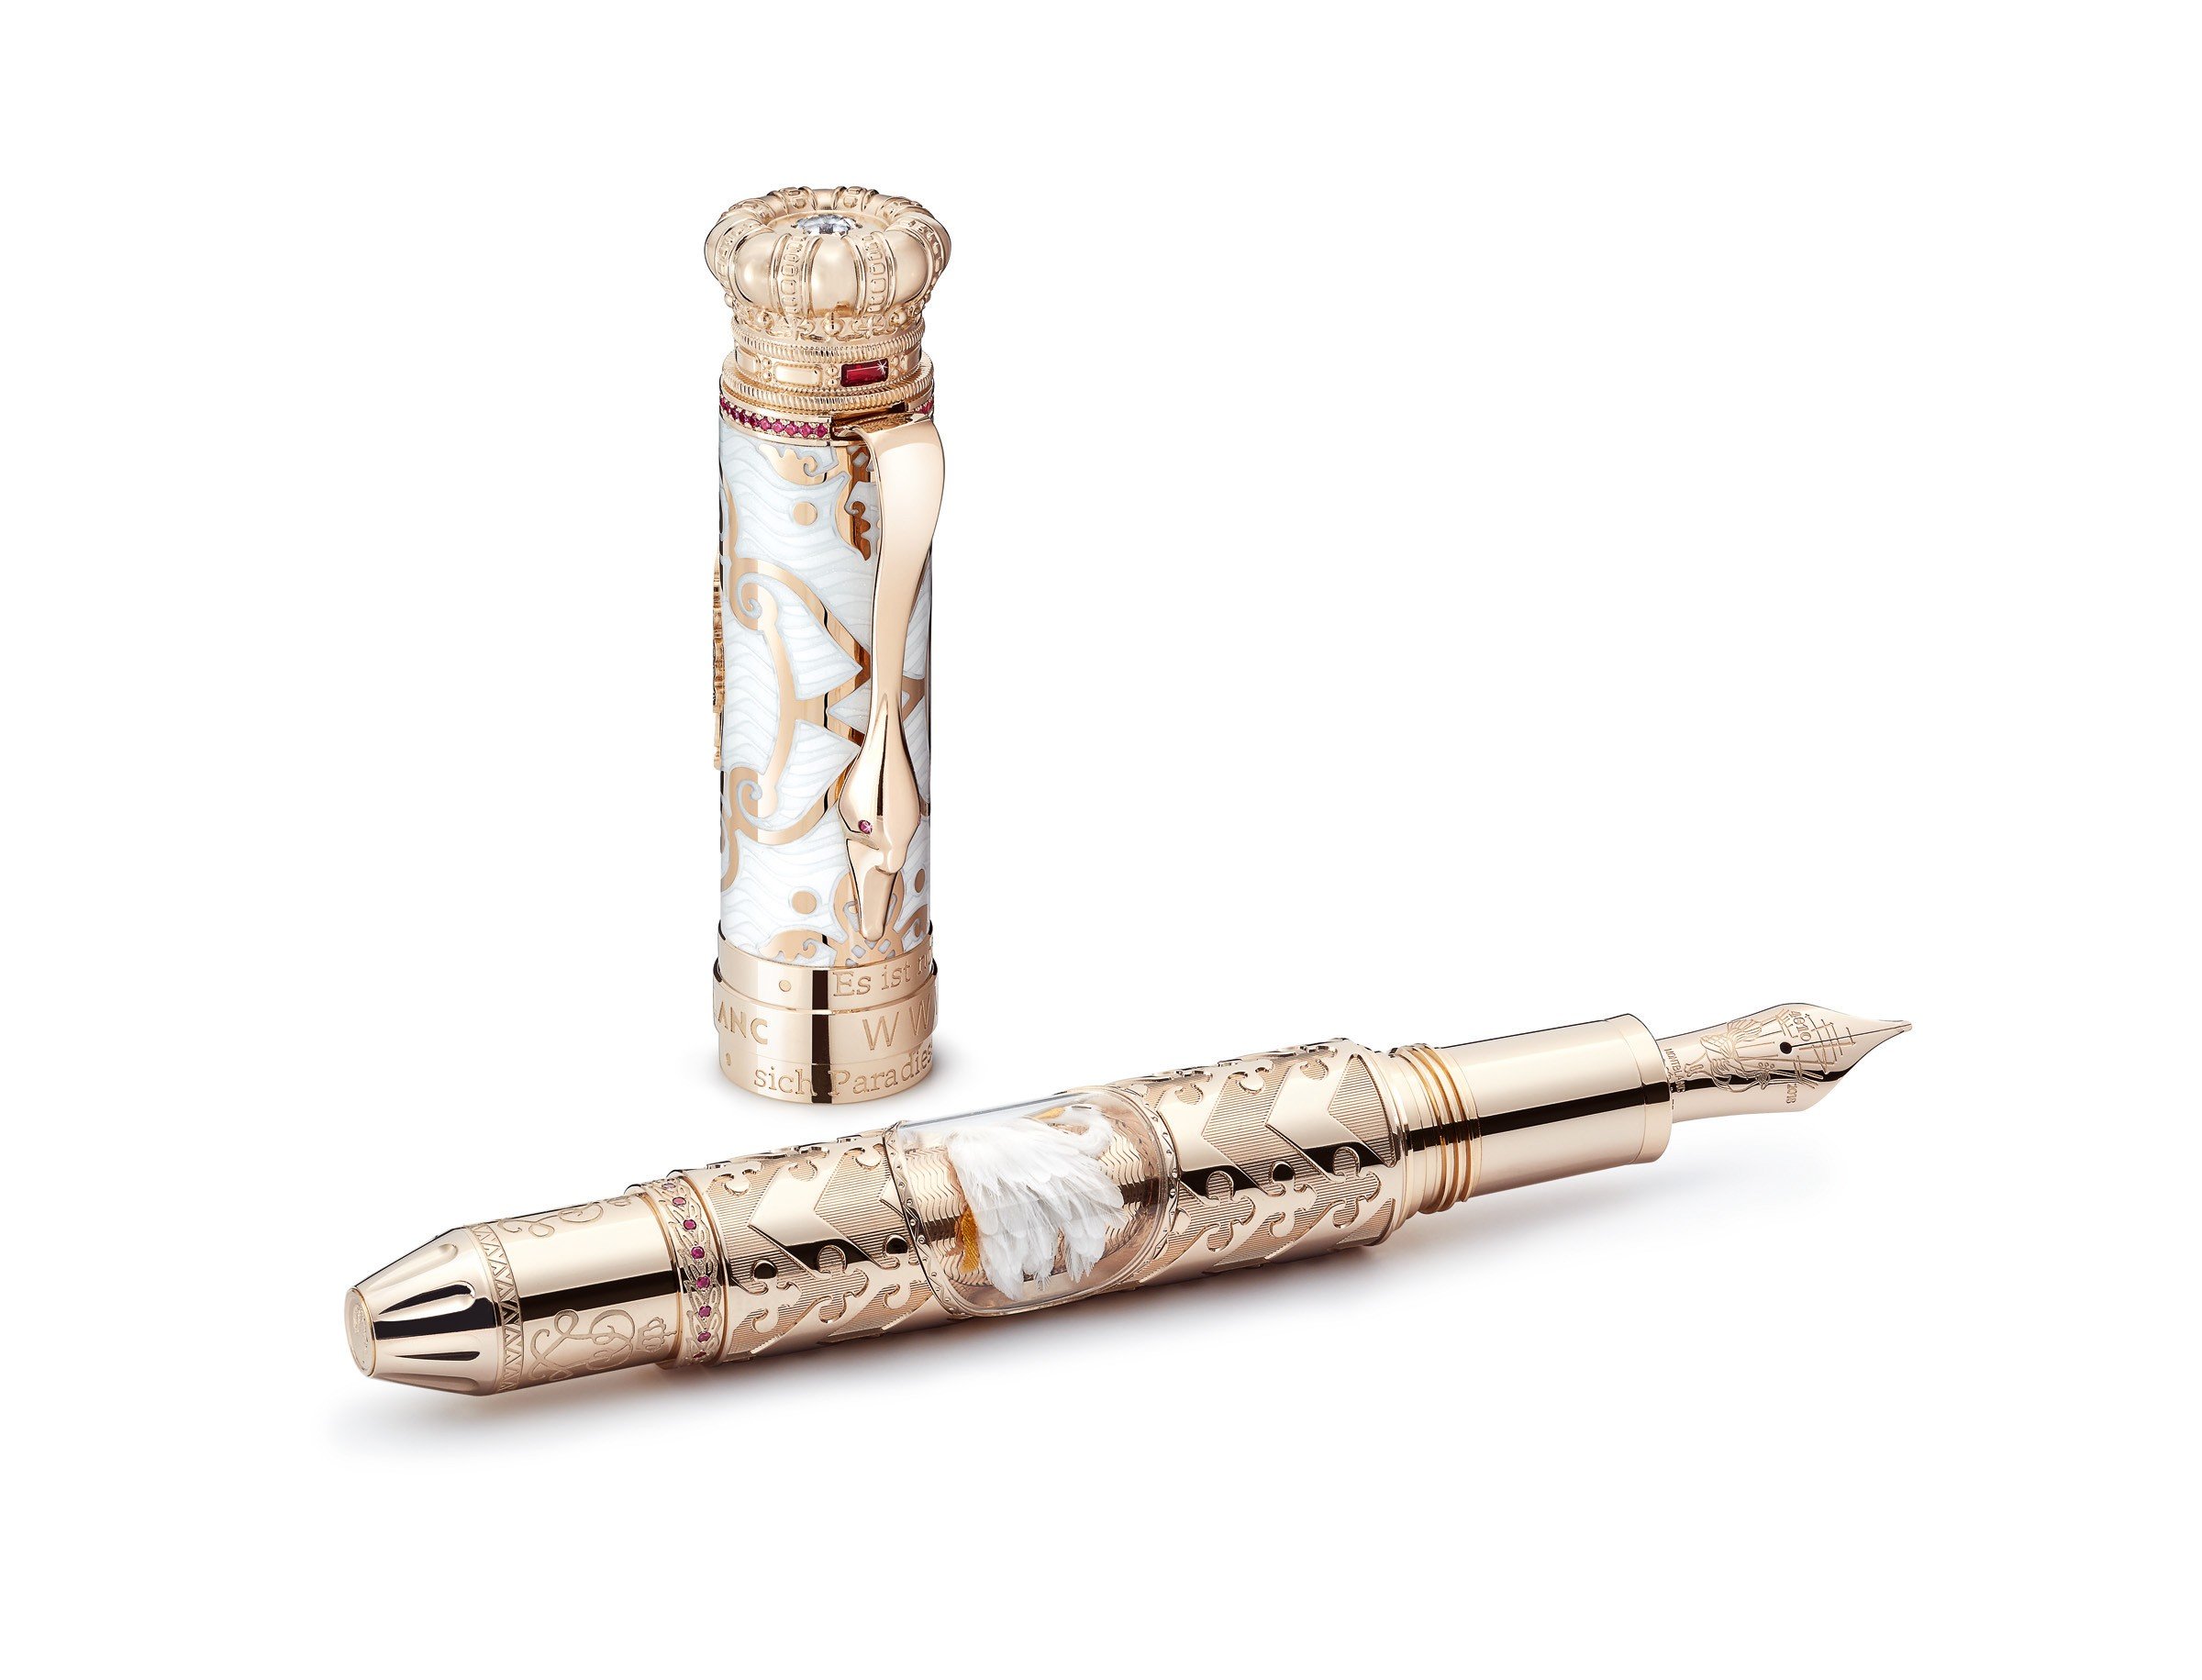 Montblanc’s limited-edition fountain pen